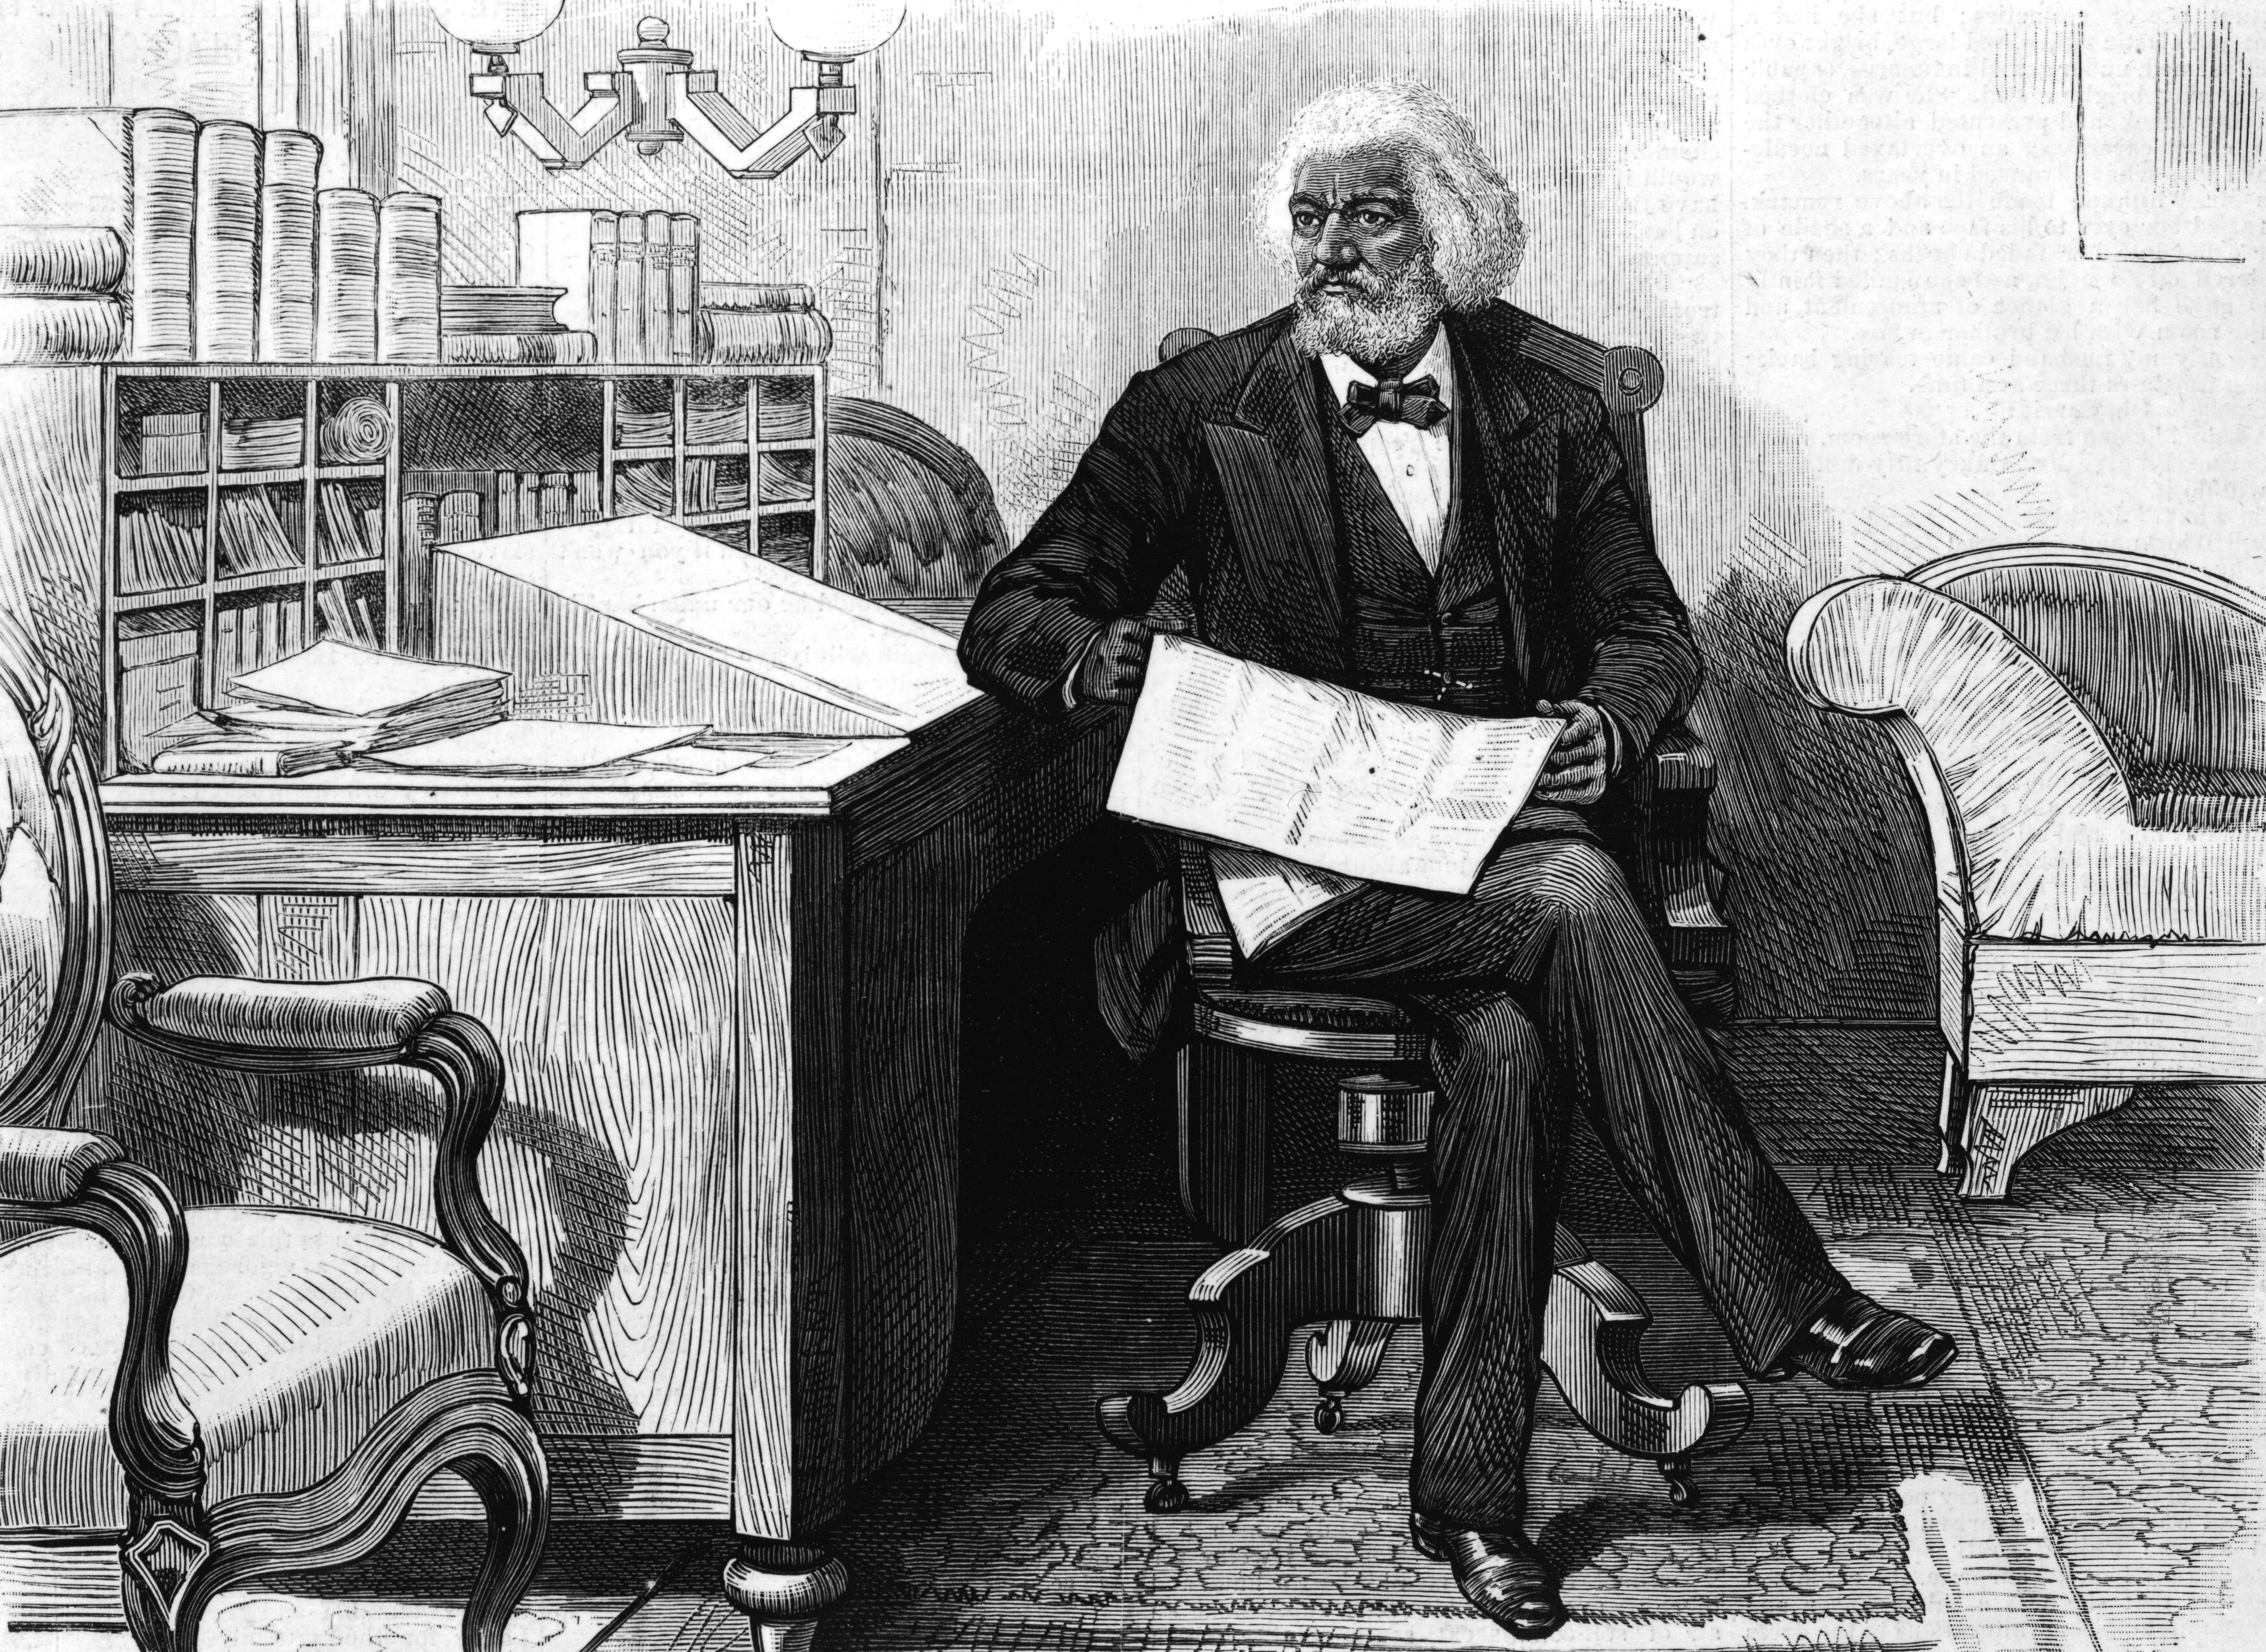 After escaping slavery, Frederick Douglass worked with the abolitionist movement, working to allow black Americans to enlist in the army during the civil war